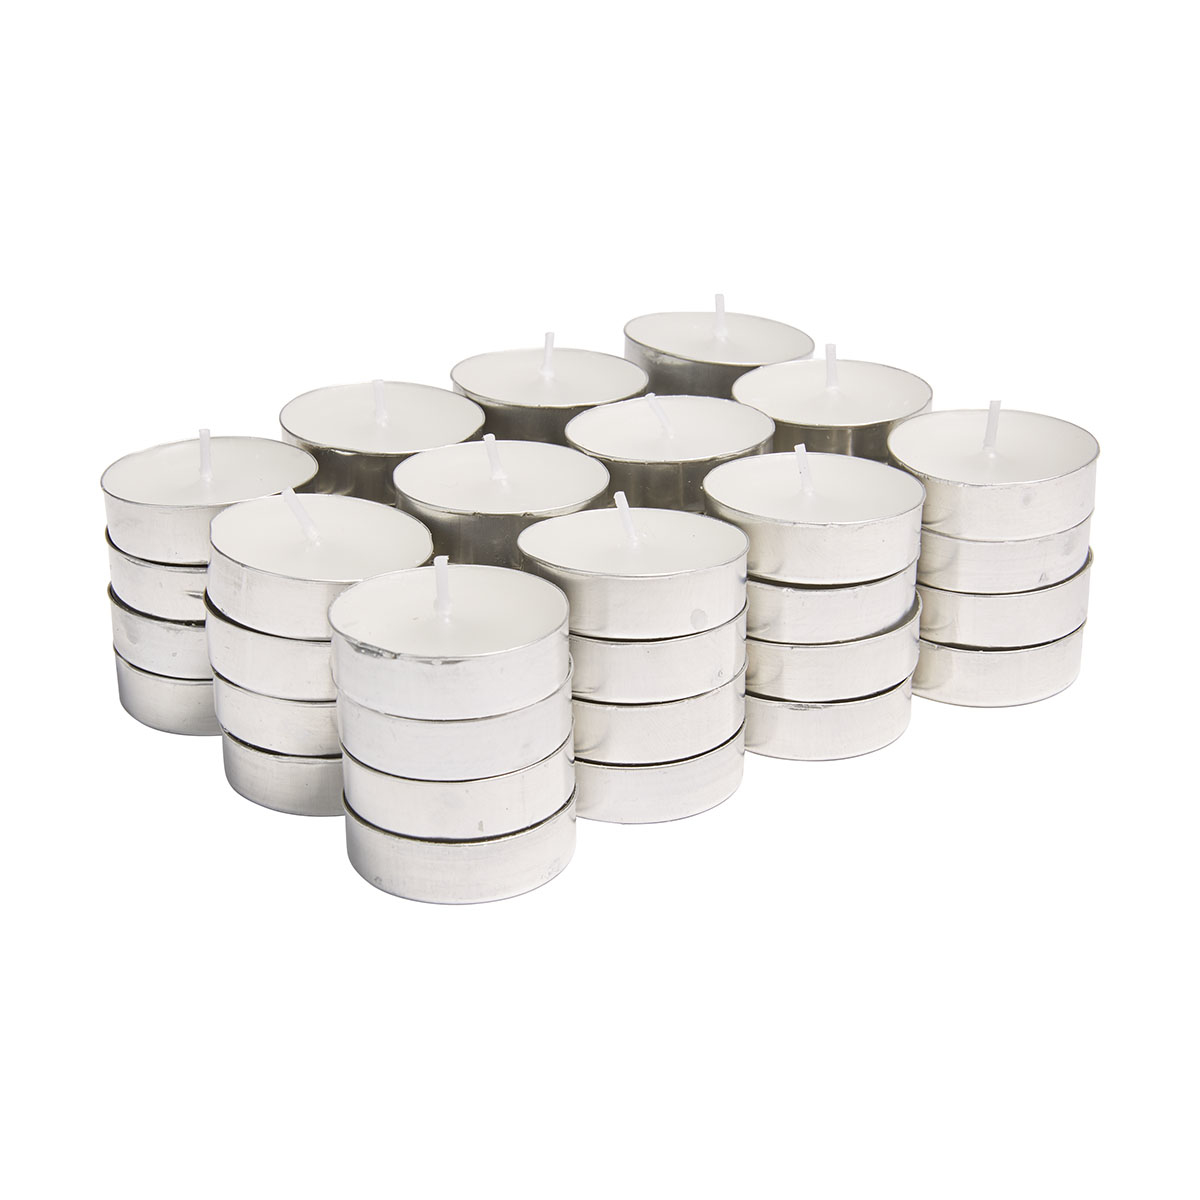 Citronella Tea Light Candles - Pack of 48